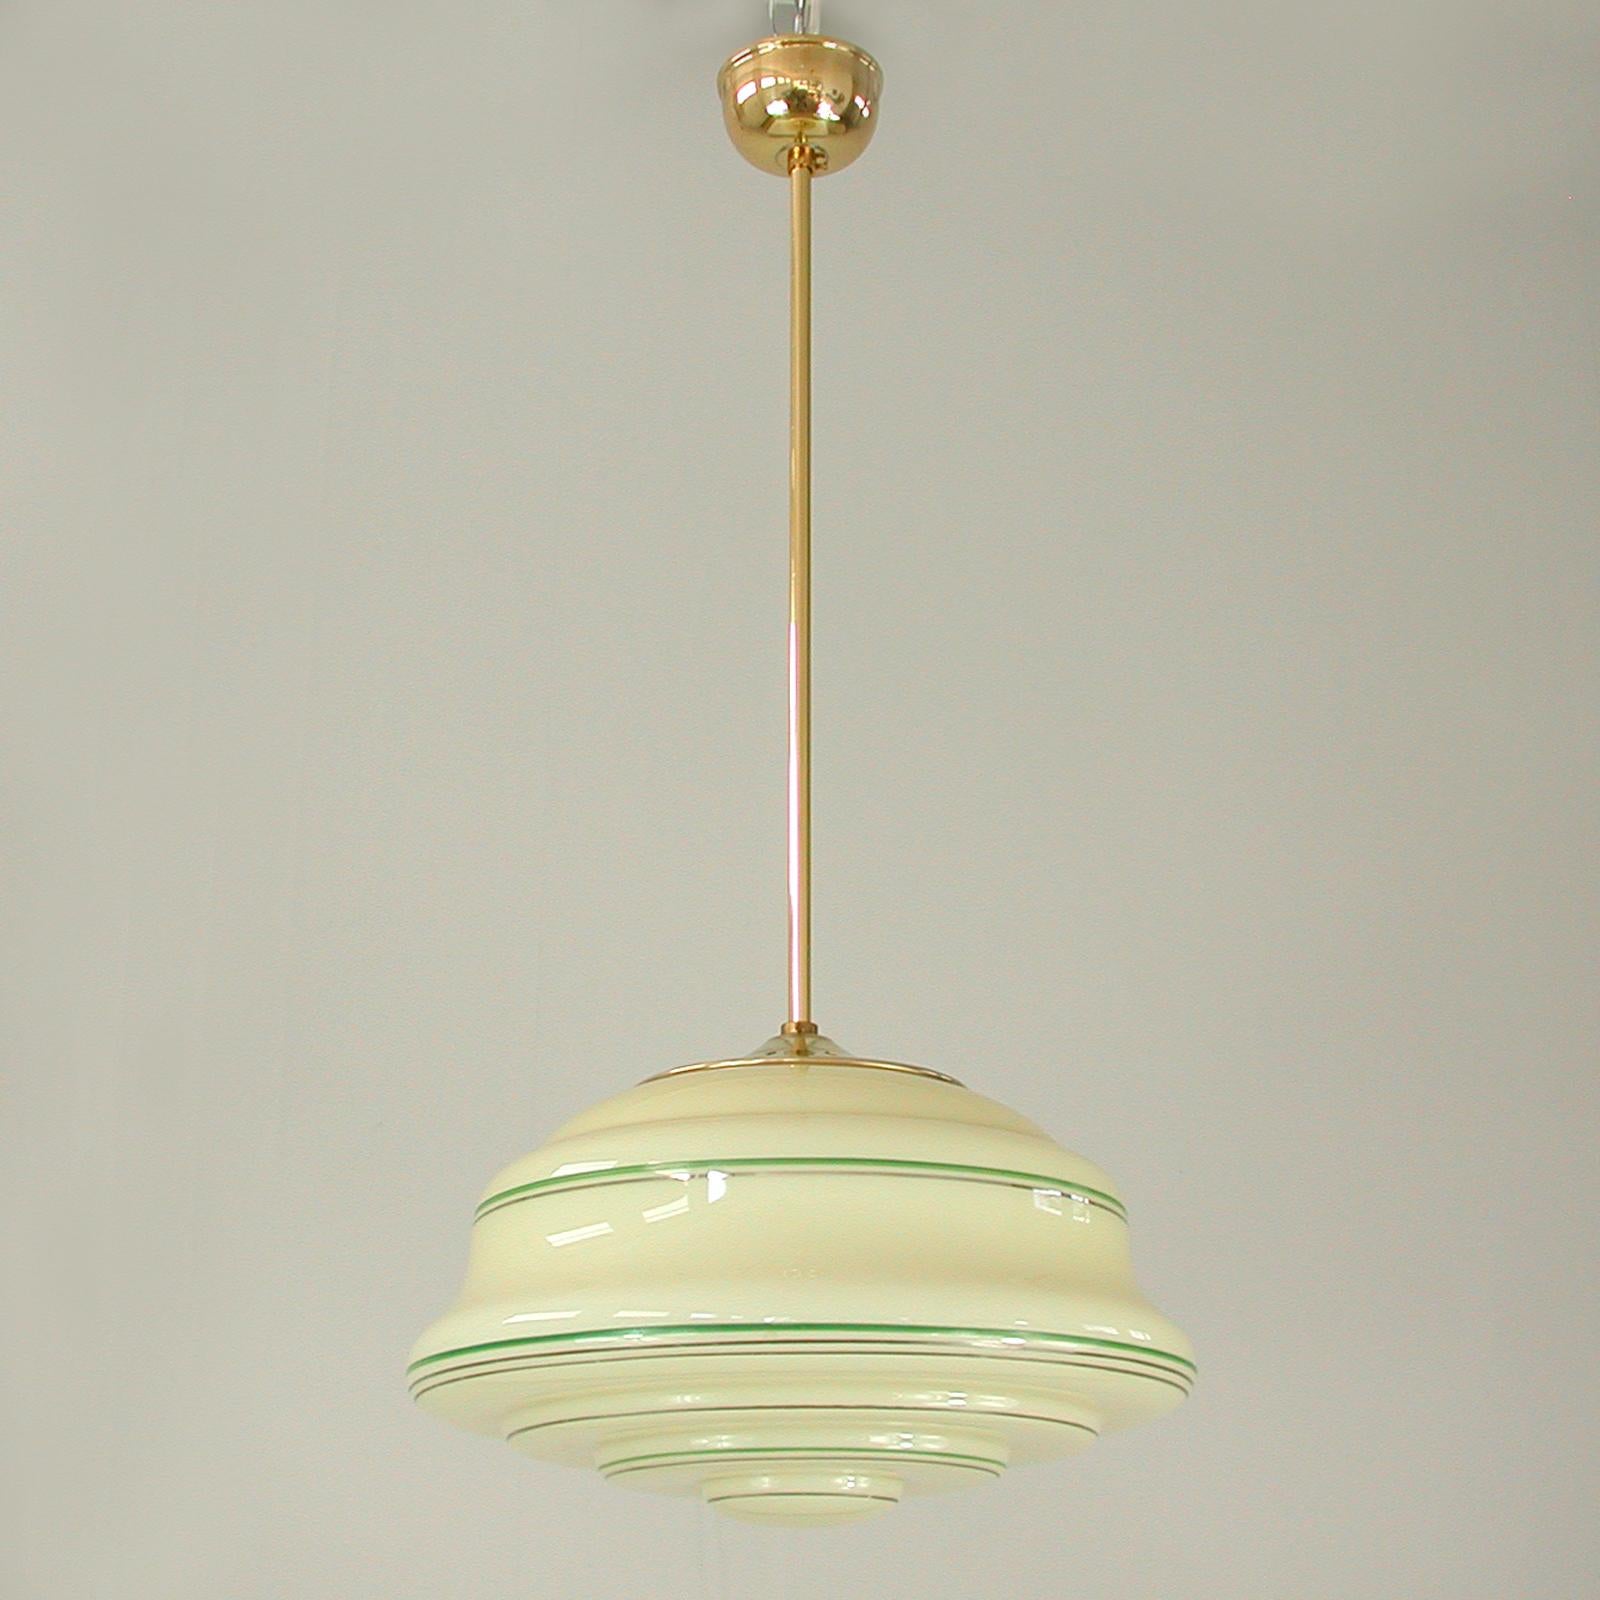 This beautiful Art Deco pendant was designed and manufactured in Germany in the 1920s-1930s. It features a cream colored Opaline lamp shade with brass details. The lamp shade has got a green and silver enameled decor. The light is in very good